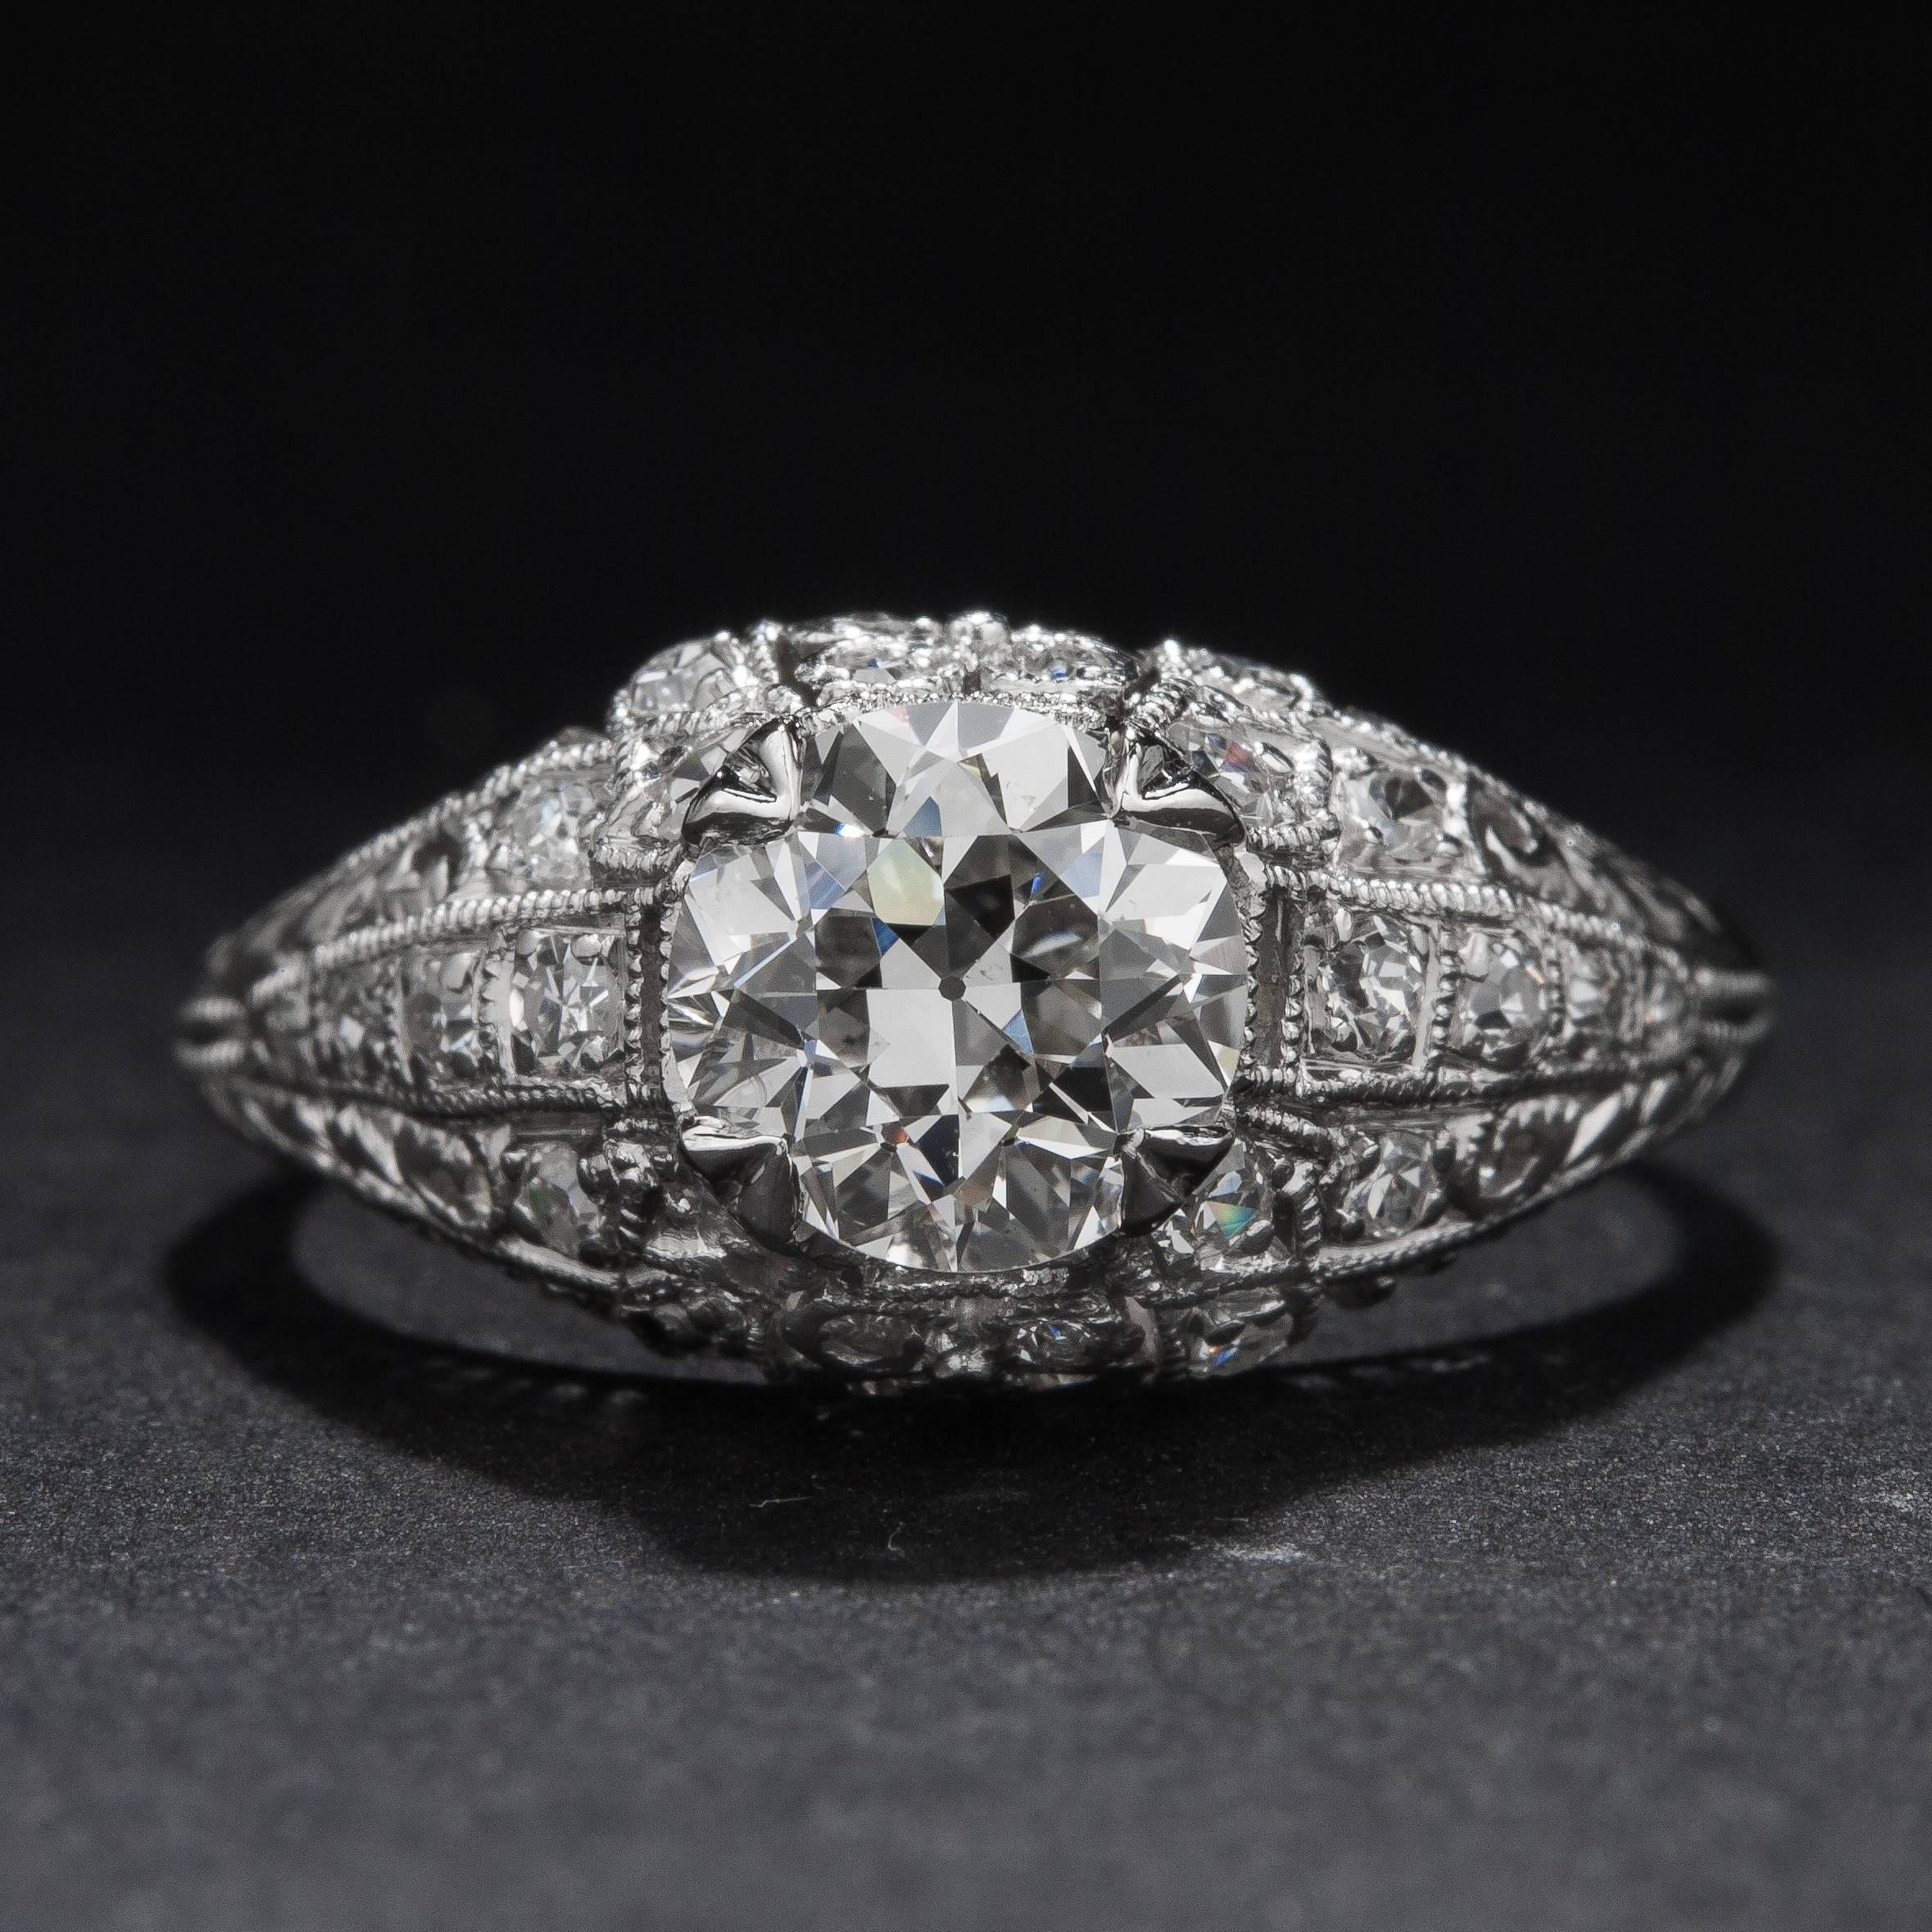 This stunning Art Deco era ring features a 1.02 carat center diamond (H color, VS2 clarity) and .28 total carats worth of accent diamonds. This beautiful mounting is crafted in platinum and the ring is currently size 6.5.